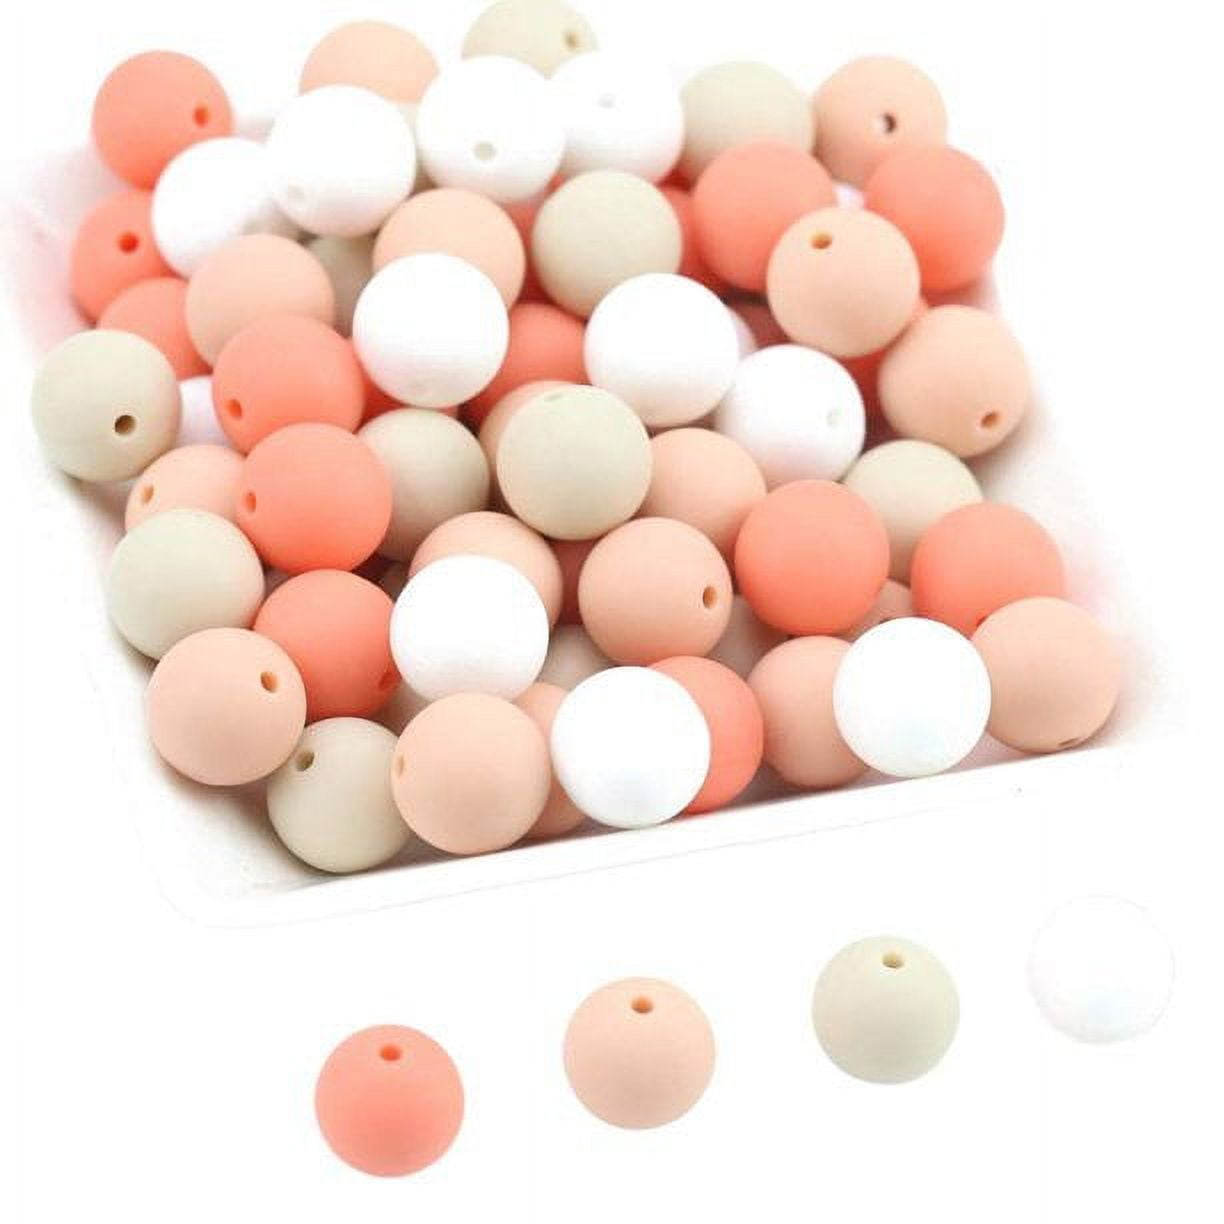 Food Grade 12mm Silicone Silicone Beads For Teething From